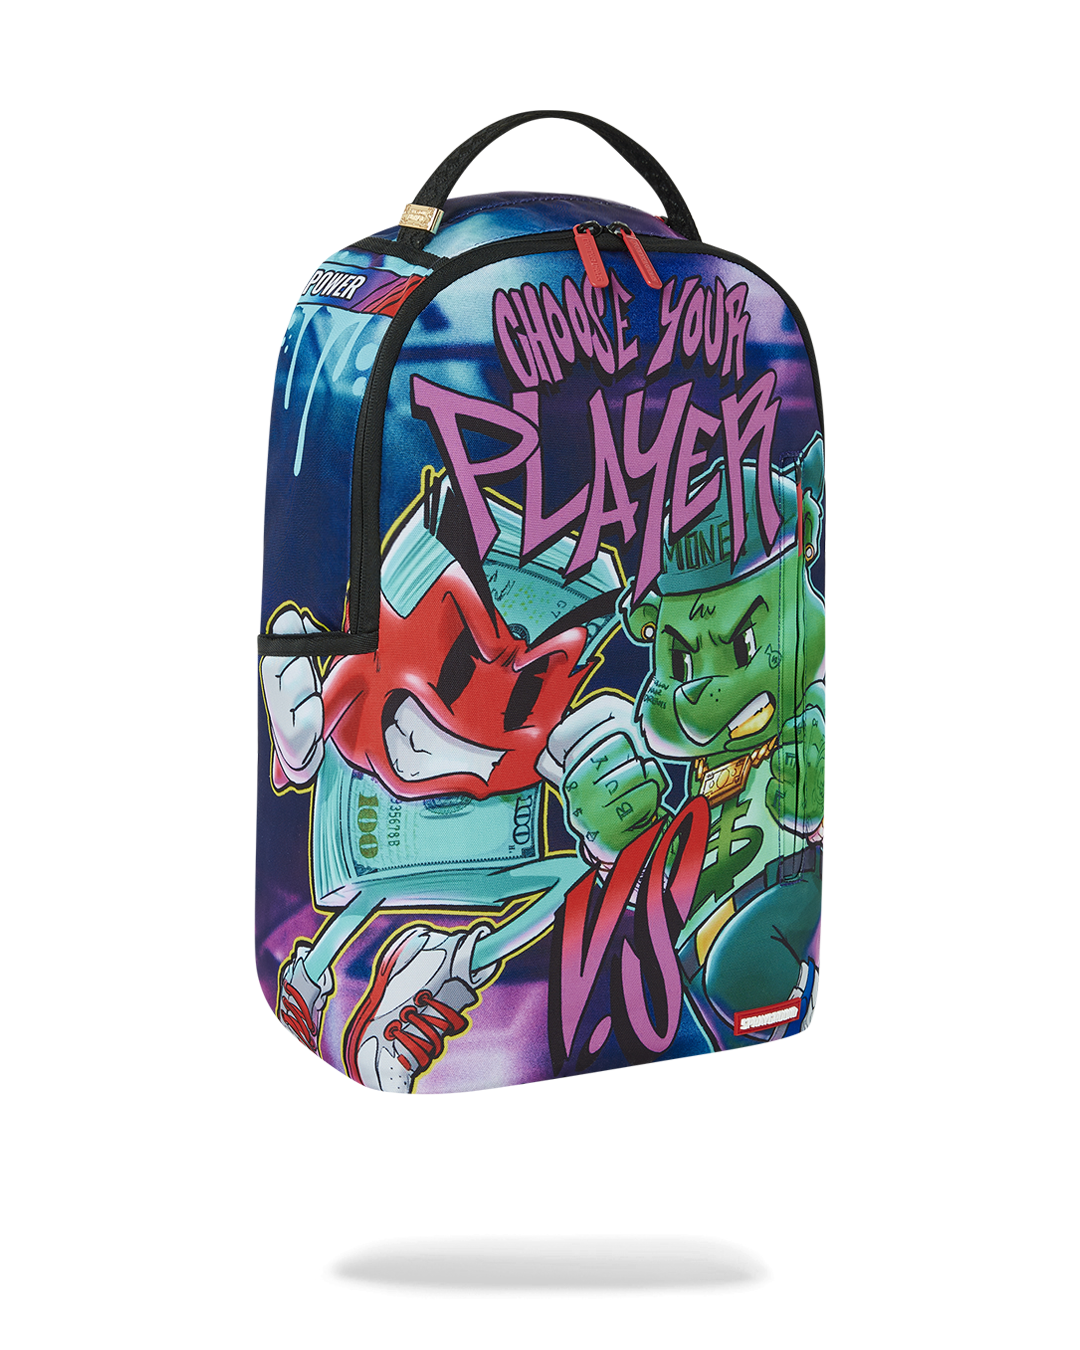 SPRAYGROUND® BACKPACK CHOOSE YOUR PLAYER BACKPACK